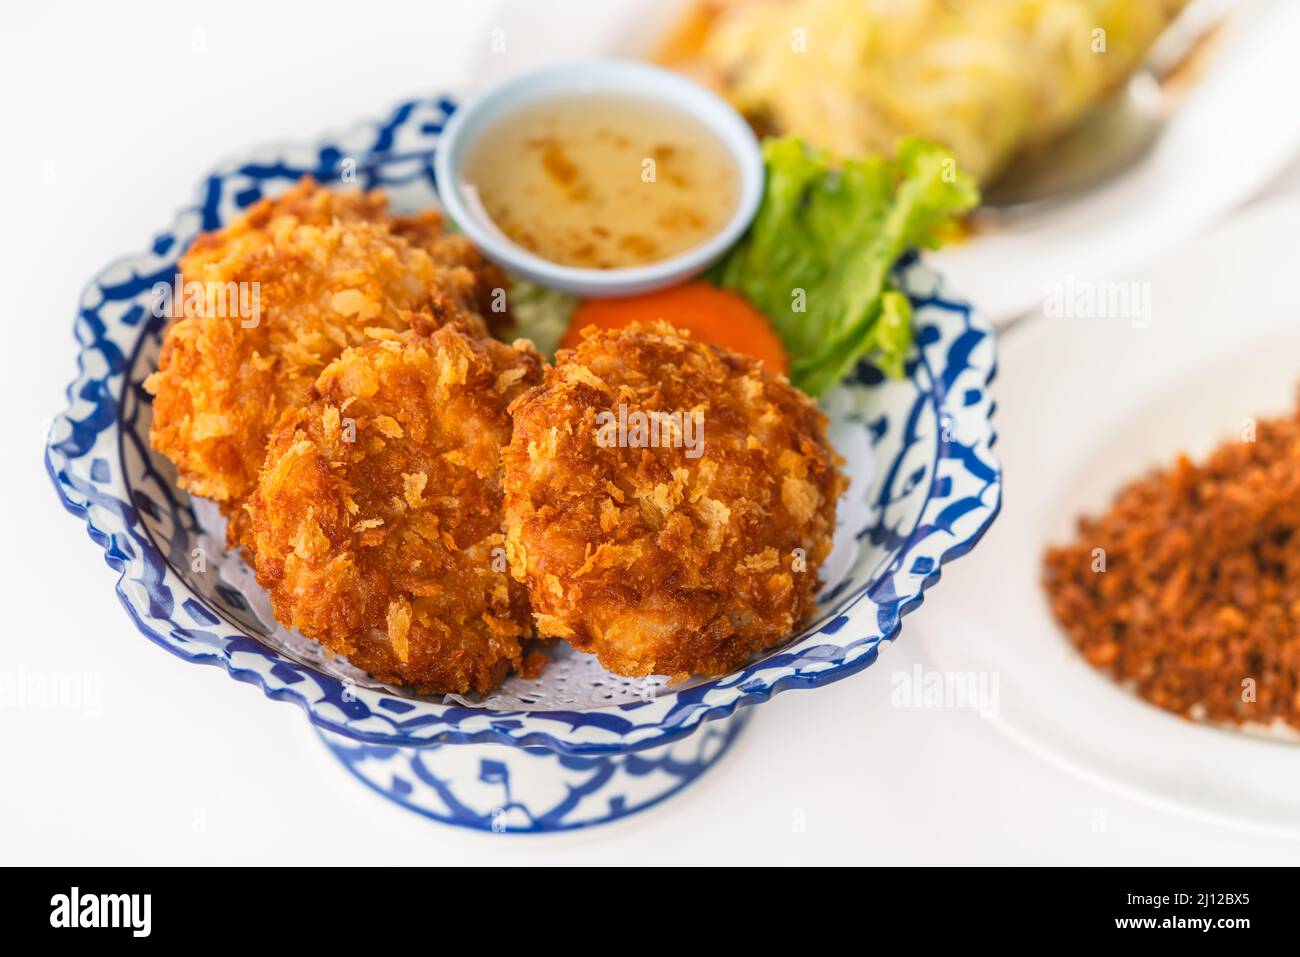 Deep-fried shrimp Cake on a beautiful plate with plum sauce, close-up image of deep-fried shrimp cake with blurred other food on white background, an Stock Photo